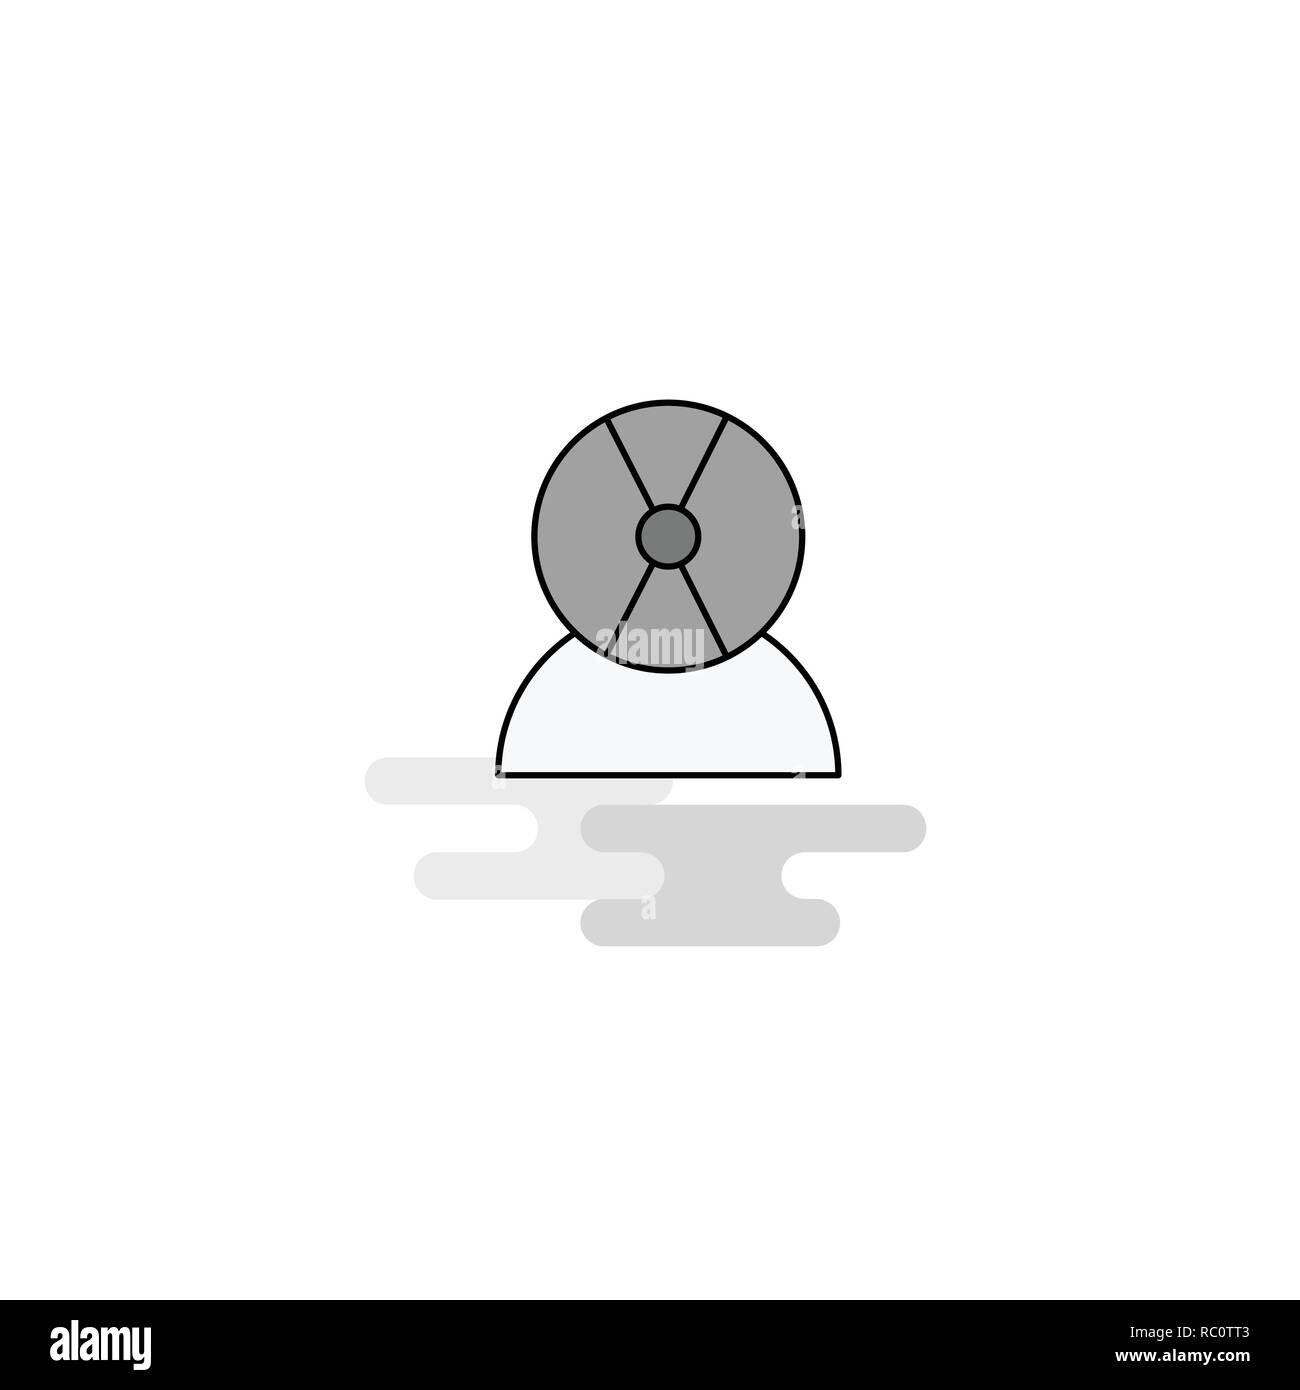 Disk avatar Web Icon. Flat Line Filled Gray Icon Vector Stock Vector